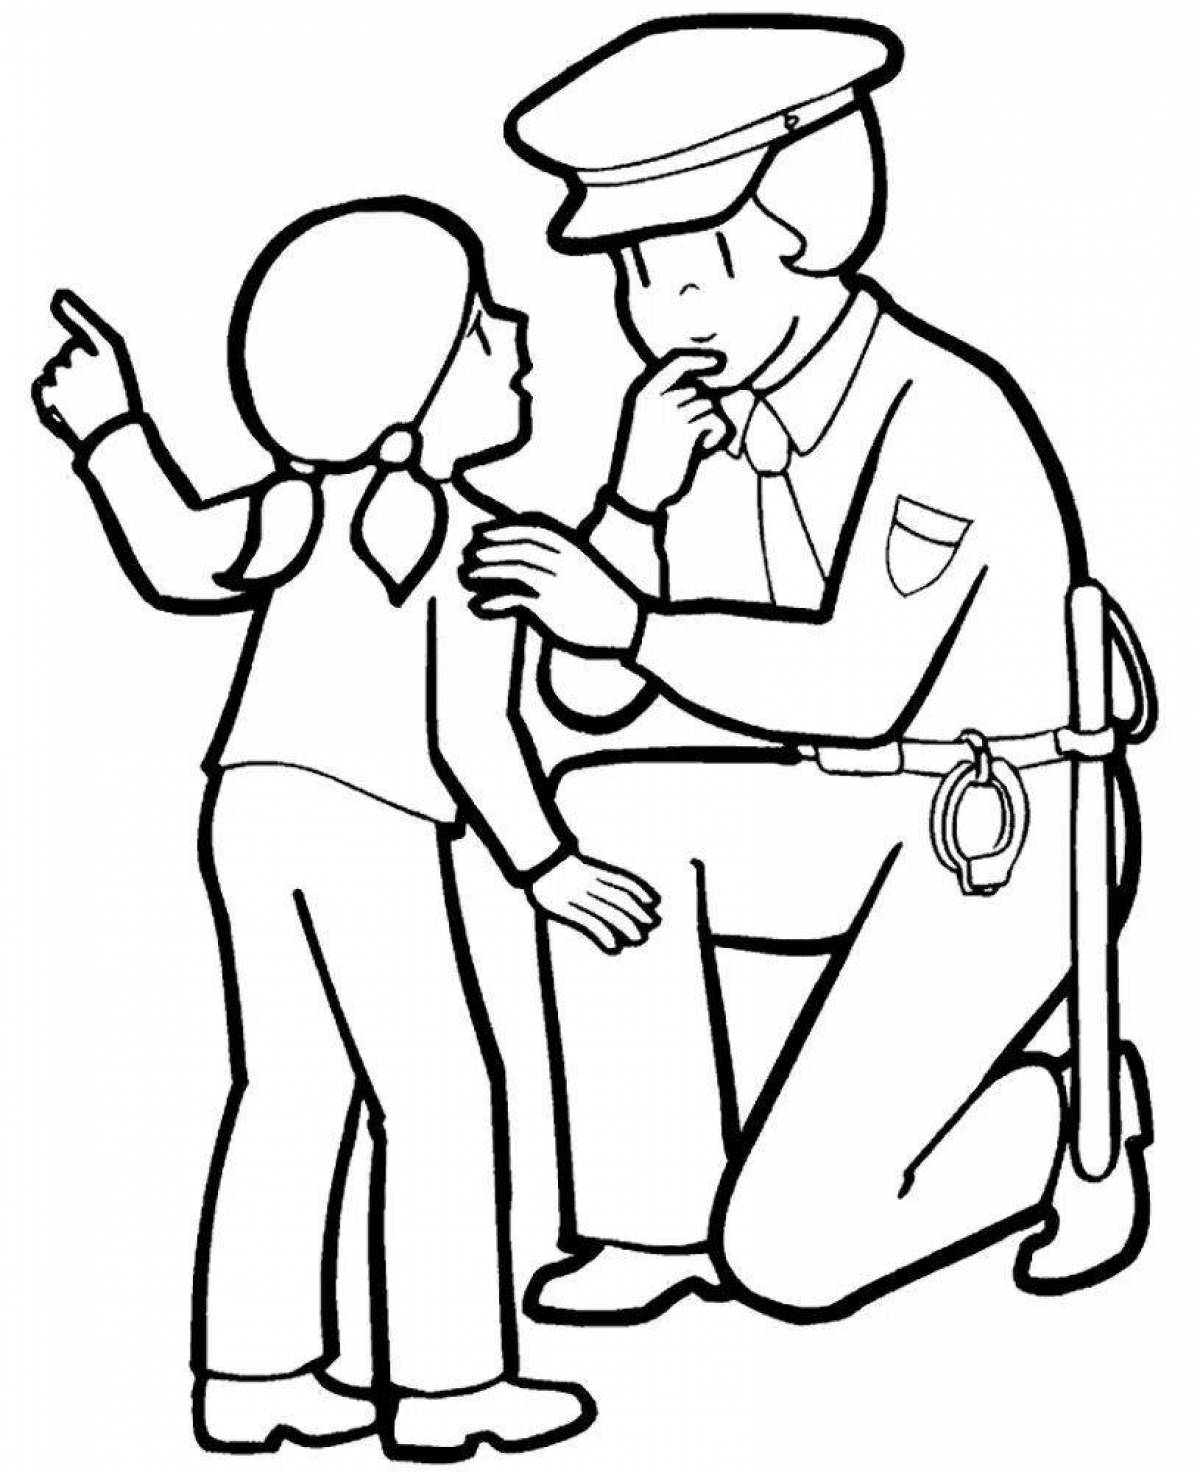 Bold police profession coloring page